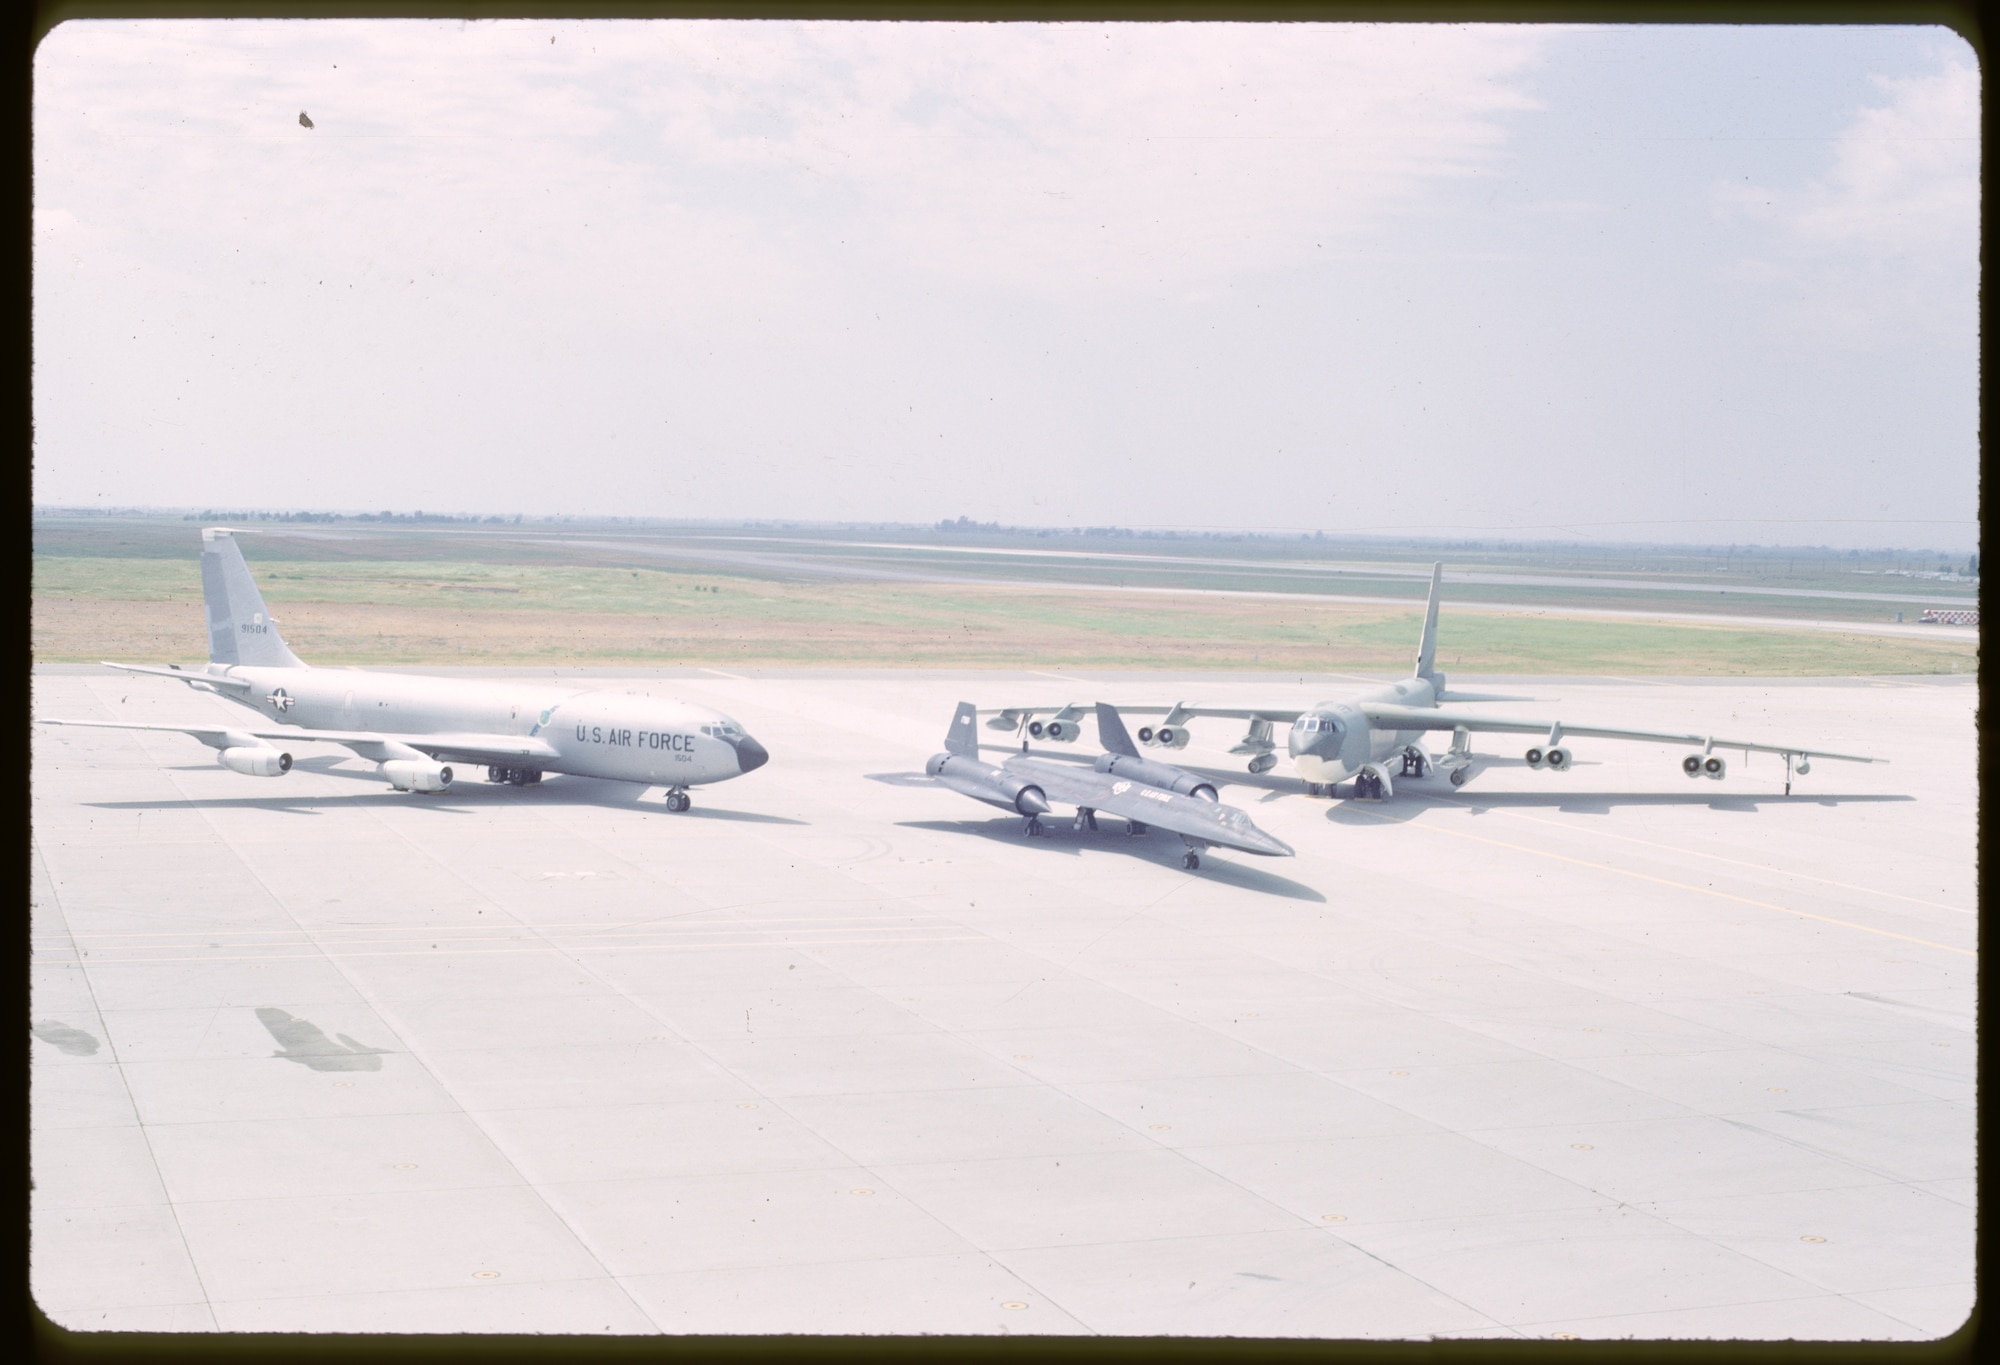 A KC-135 Stratotanker (left), SR-71 Blackbird (middle) and a B-52 Stratofortress (right) sit on the flightline at Beale Air Force Base, Calif. The aircraft were stationed at Beale during the Cold War-era. The B-52 was built to carry nuclear weapons for Cold War-era deterrence missions. (Courtesy photo)